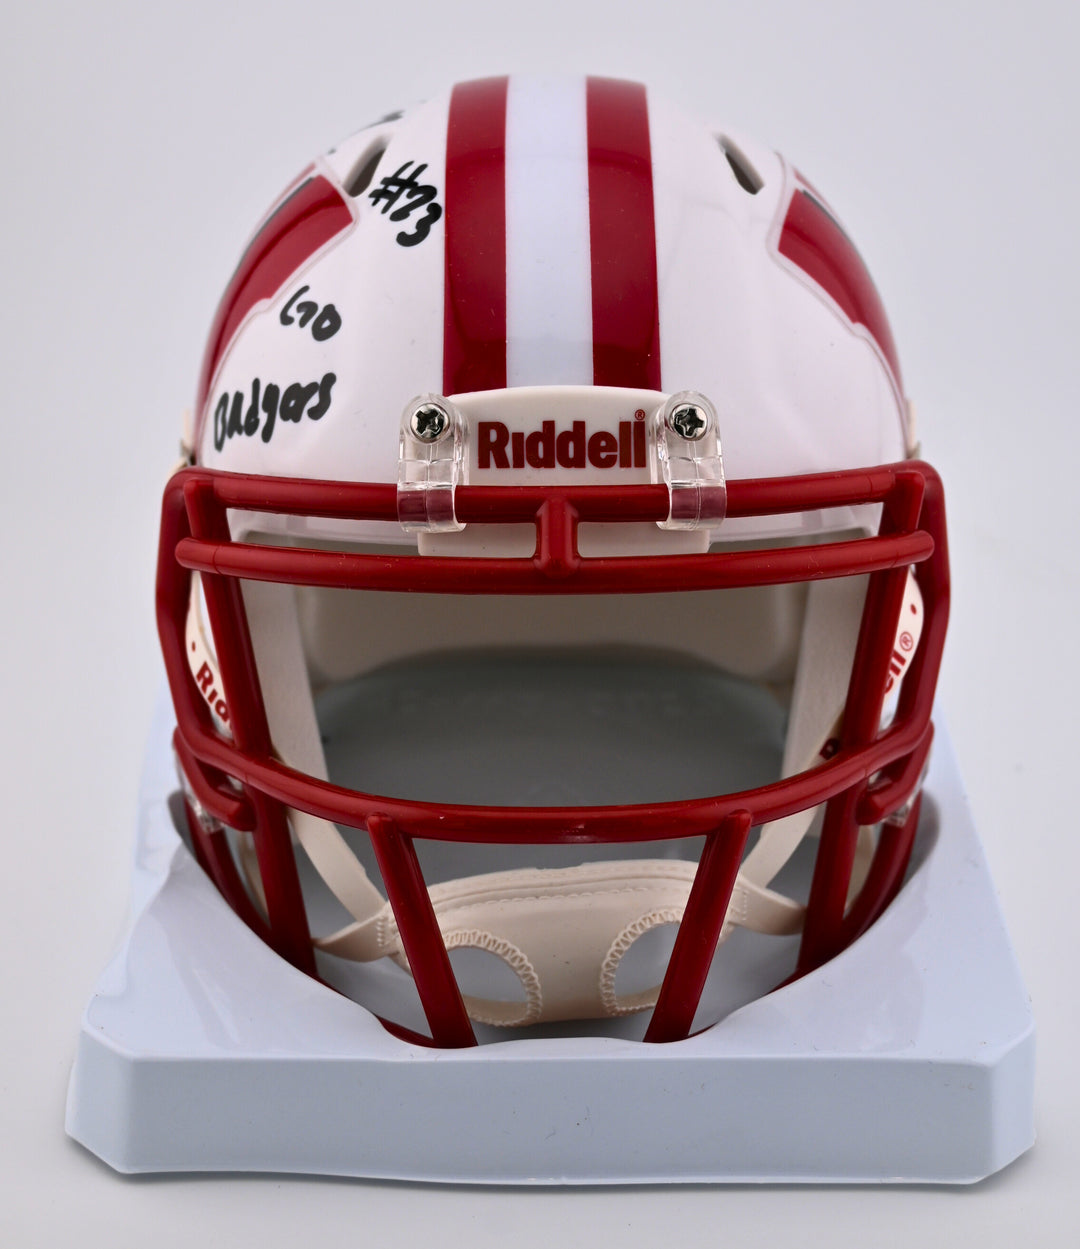 Jonathan Taylor Wisconsin Badgers Speed Autographed Mini-Helmet, Beckett Authenticated